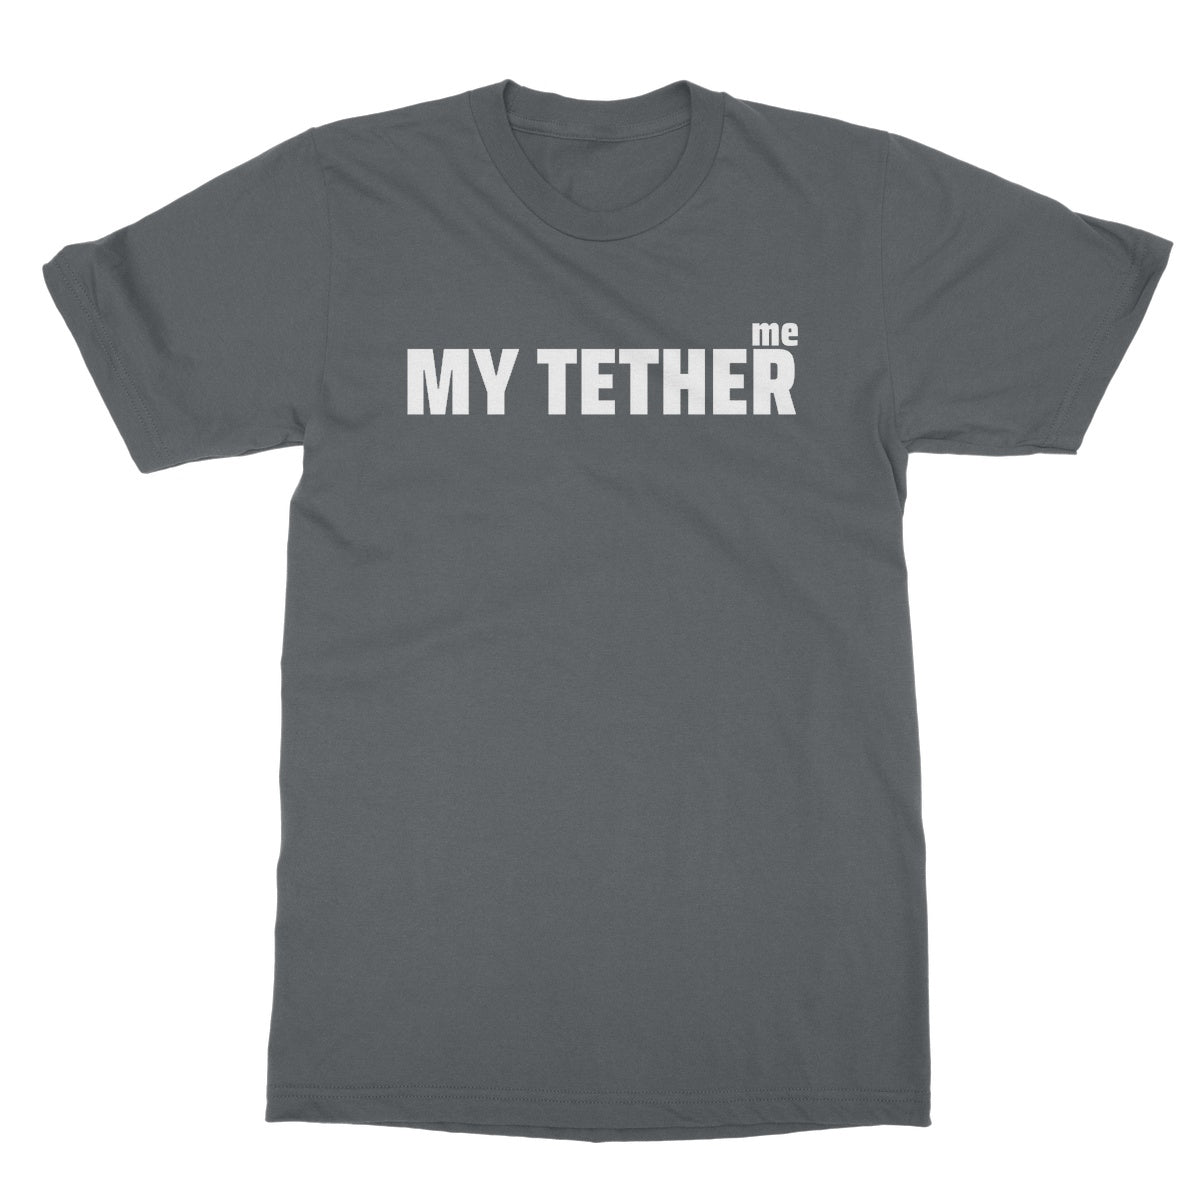 end of my tether t shirt grey